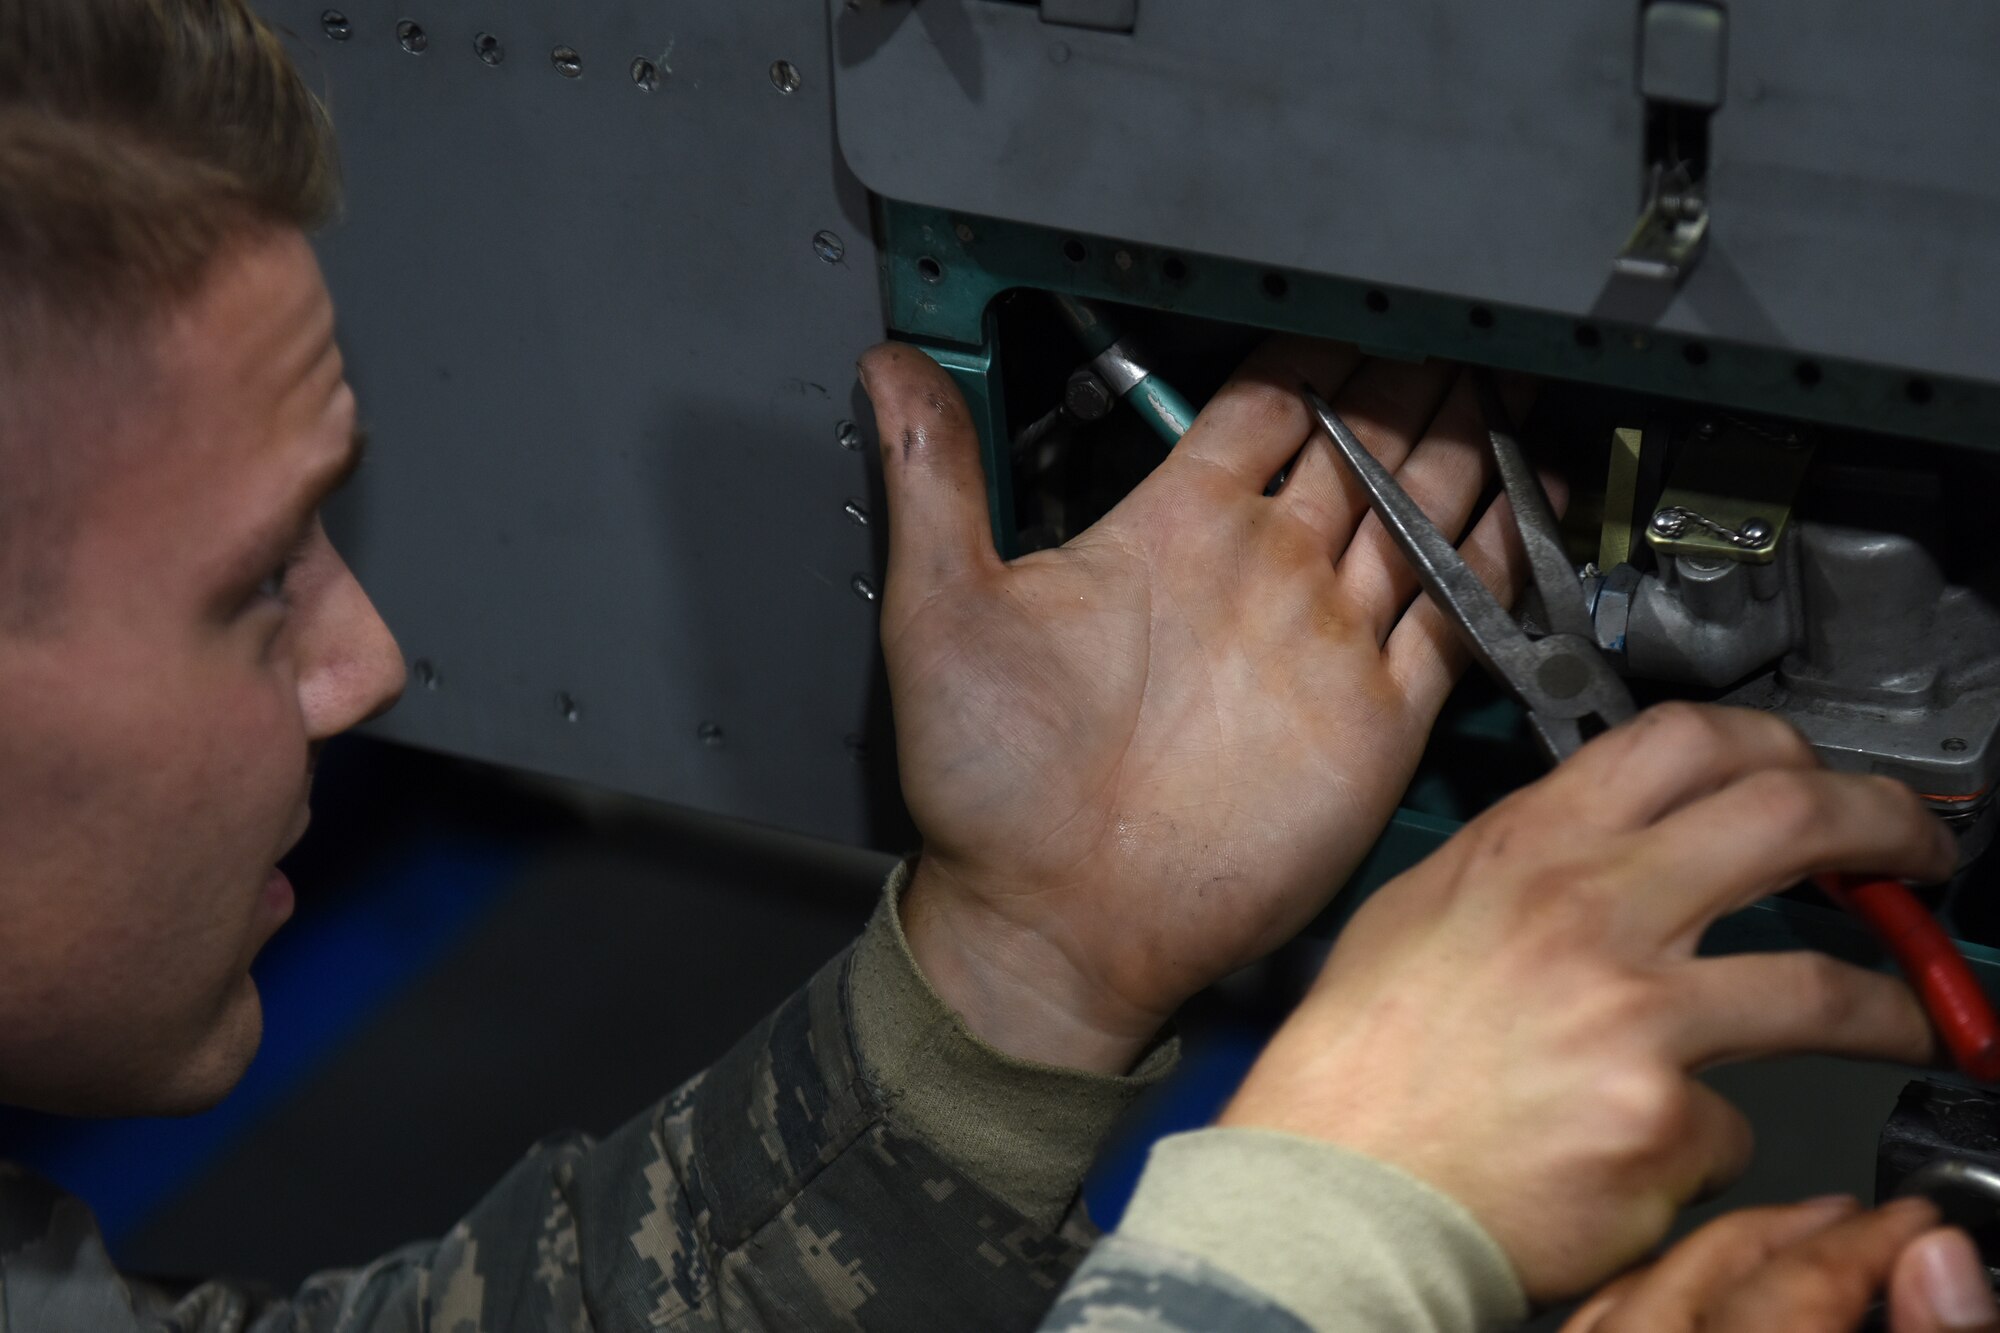 An armament maintenance technician from the 48th Munitions Squadron works on a pylon at Royal Air Force Lakenheath, England, Sept. 11, 2019. The Armament flight’s main focus is to support the flightline operations, either by having equipment ready or standing by for flightline responses. (U.S. Air Force photo by Airman 1st Class Madeline Herzog)